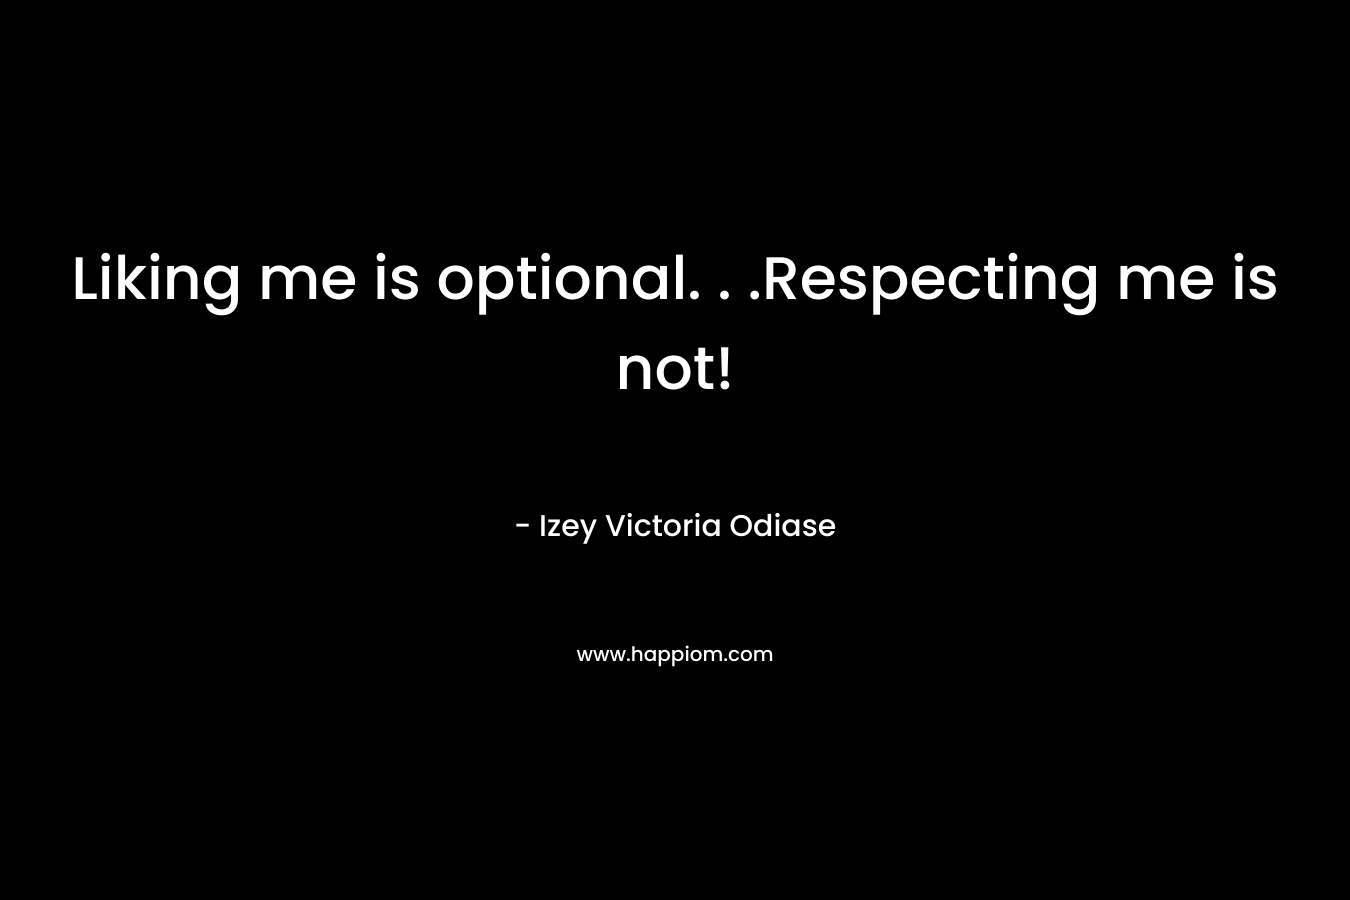 Liking me is optional. . .Respecting me is not!